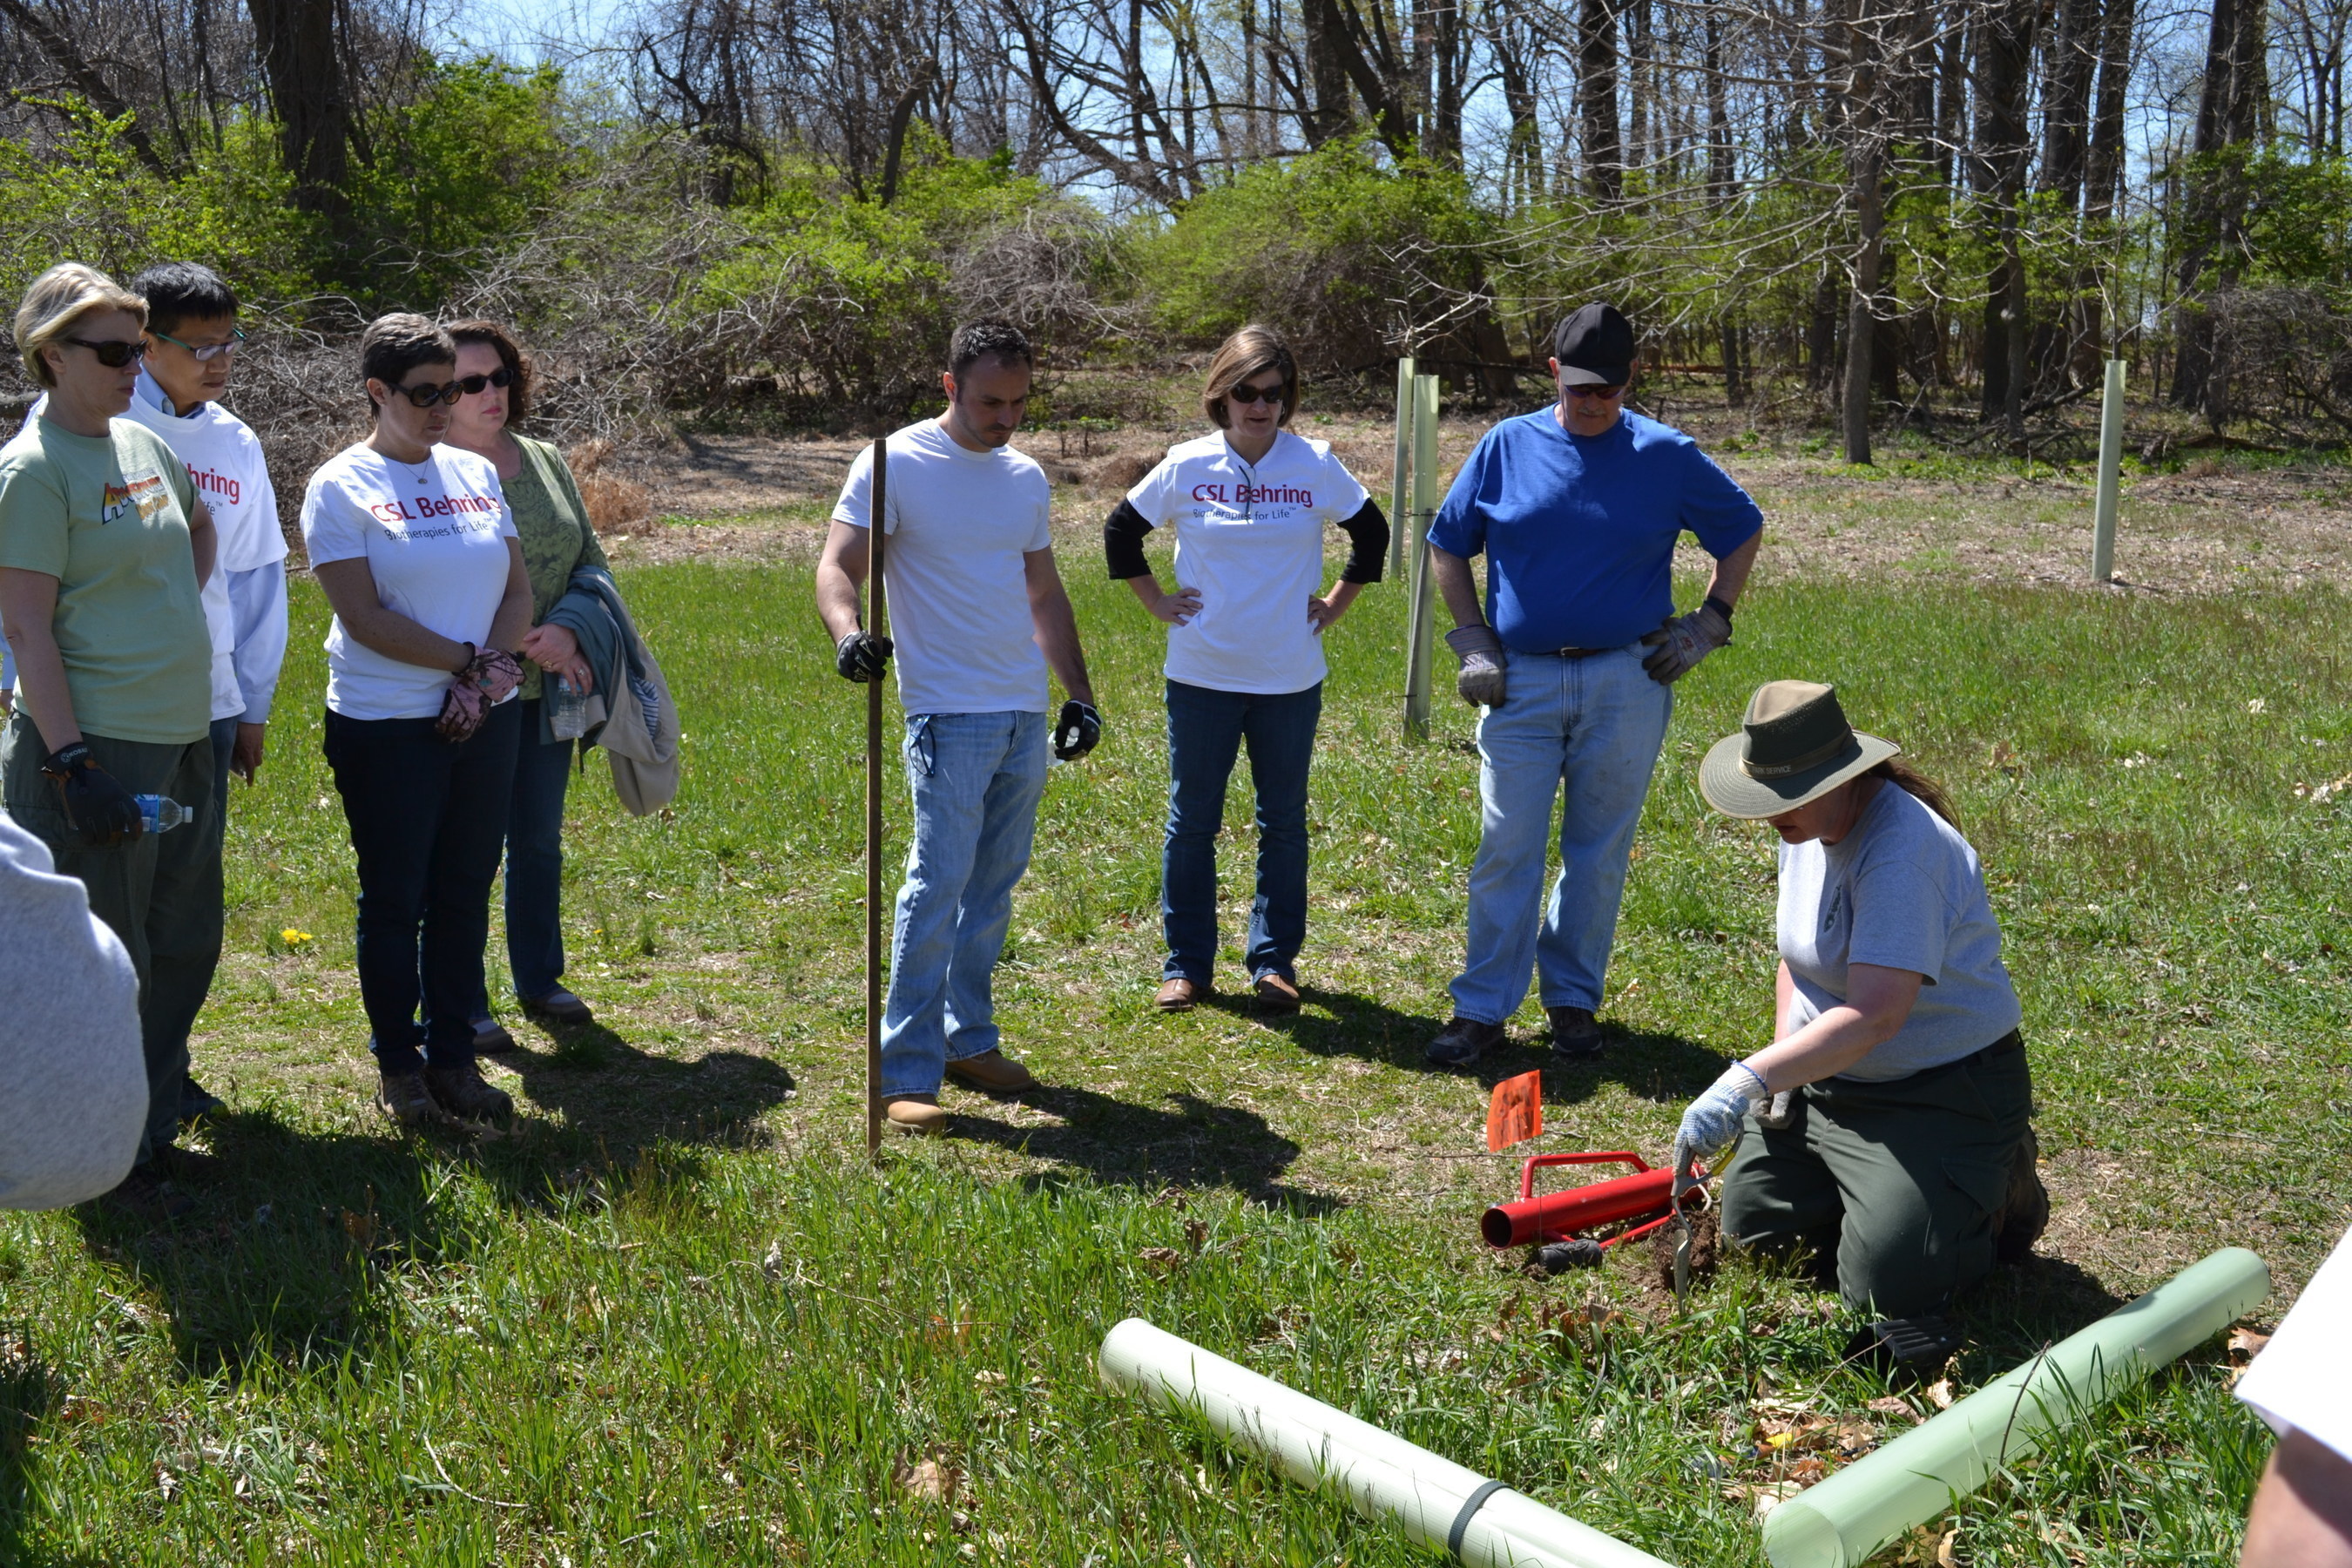 CSL Behring employees receive instructions from a Valley Forge National Park ranger before digging in and planting 100 saplings donated to the park by CSL Behring to mark the company's 100th Anniversary. The trees included five different species native to the area.